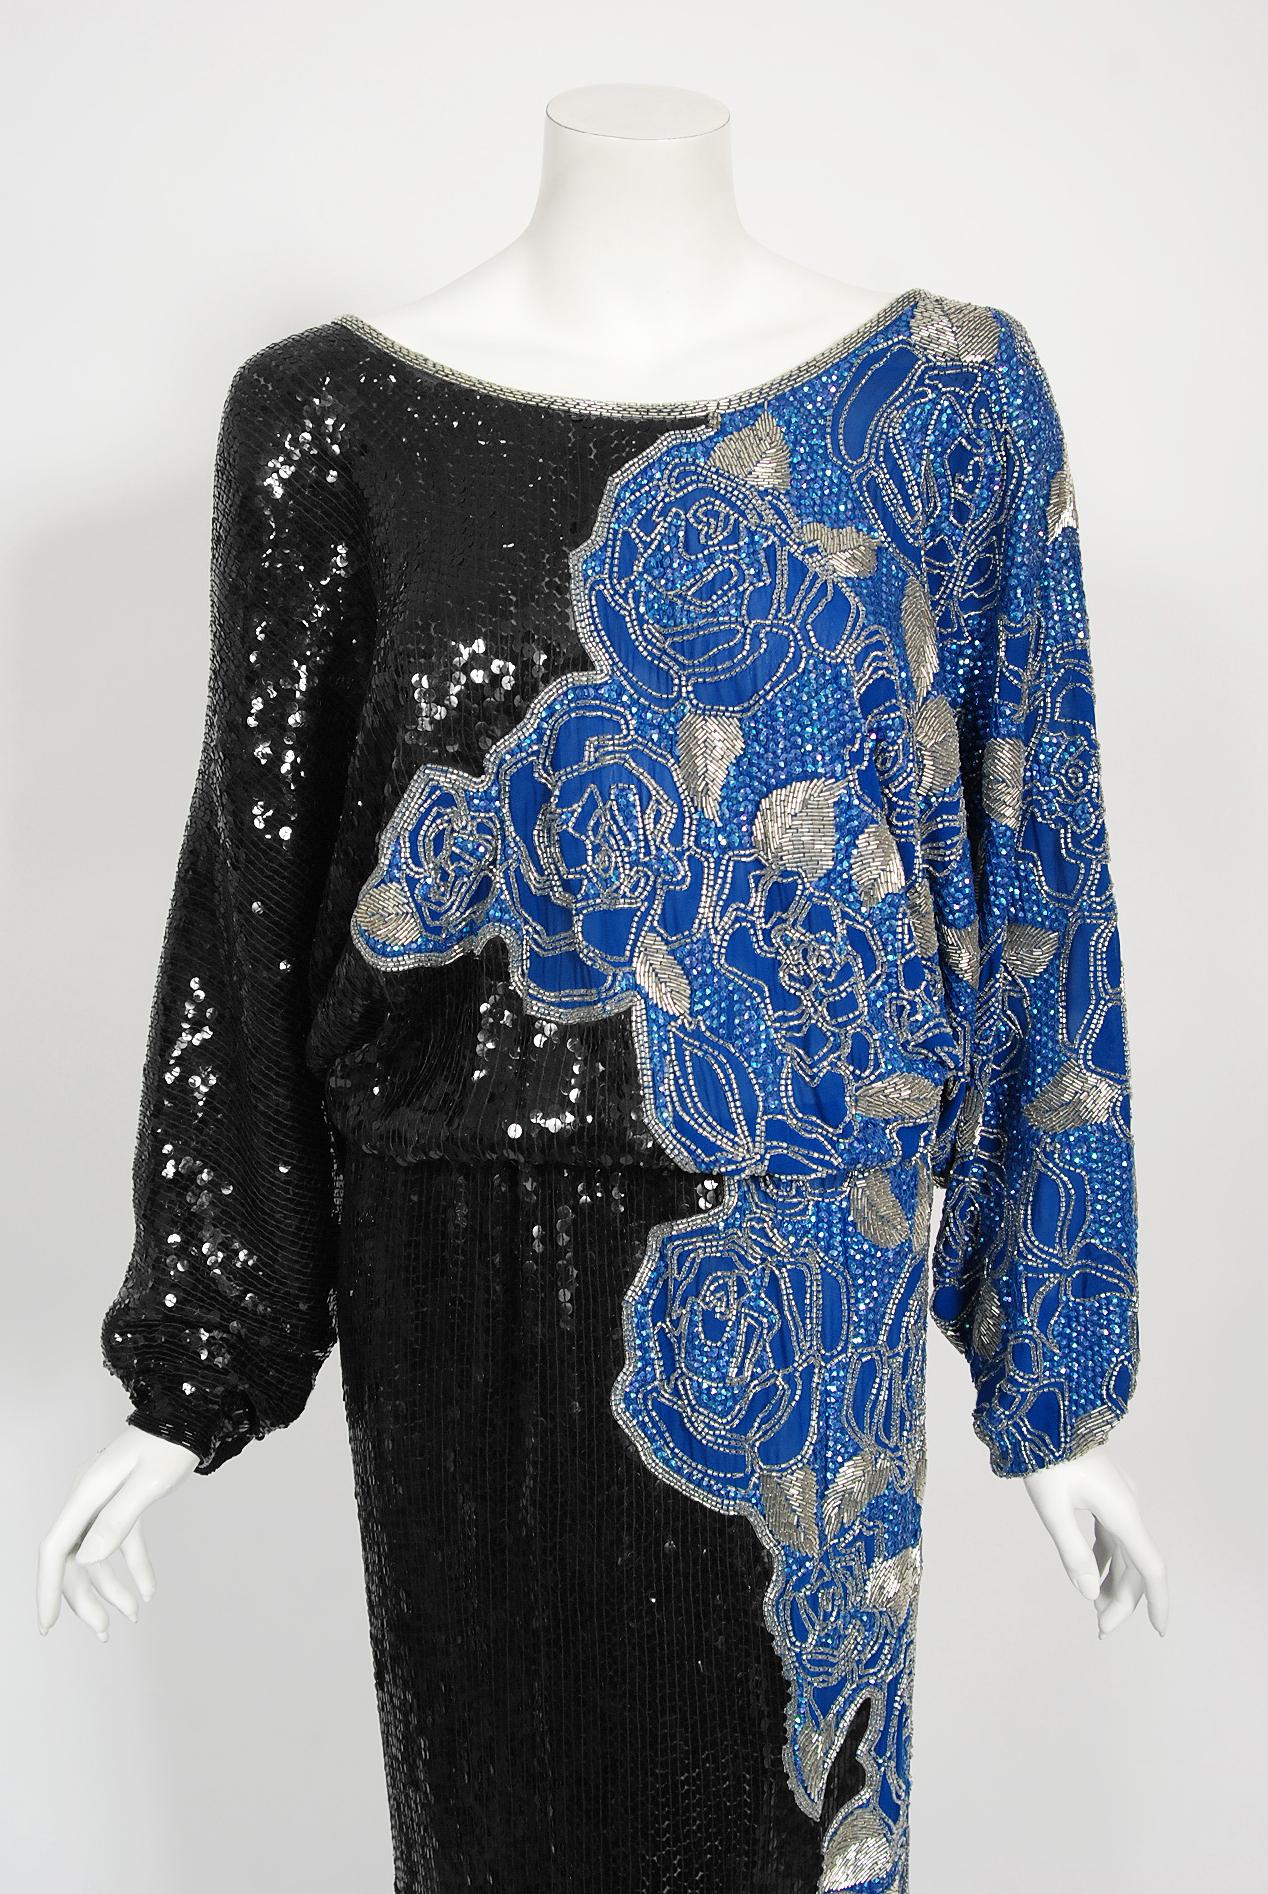 An absolutely gorgeous and totally timeless Halston couture fully-beaded black and blue silk gown dating back to the late 1970's. Halston revolutionized the way women dress and is one of the few designers, alongside Claire McCardell and Norman